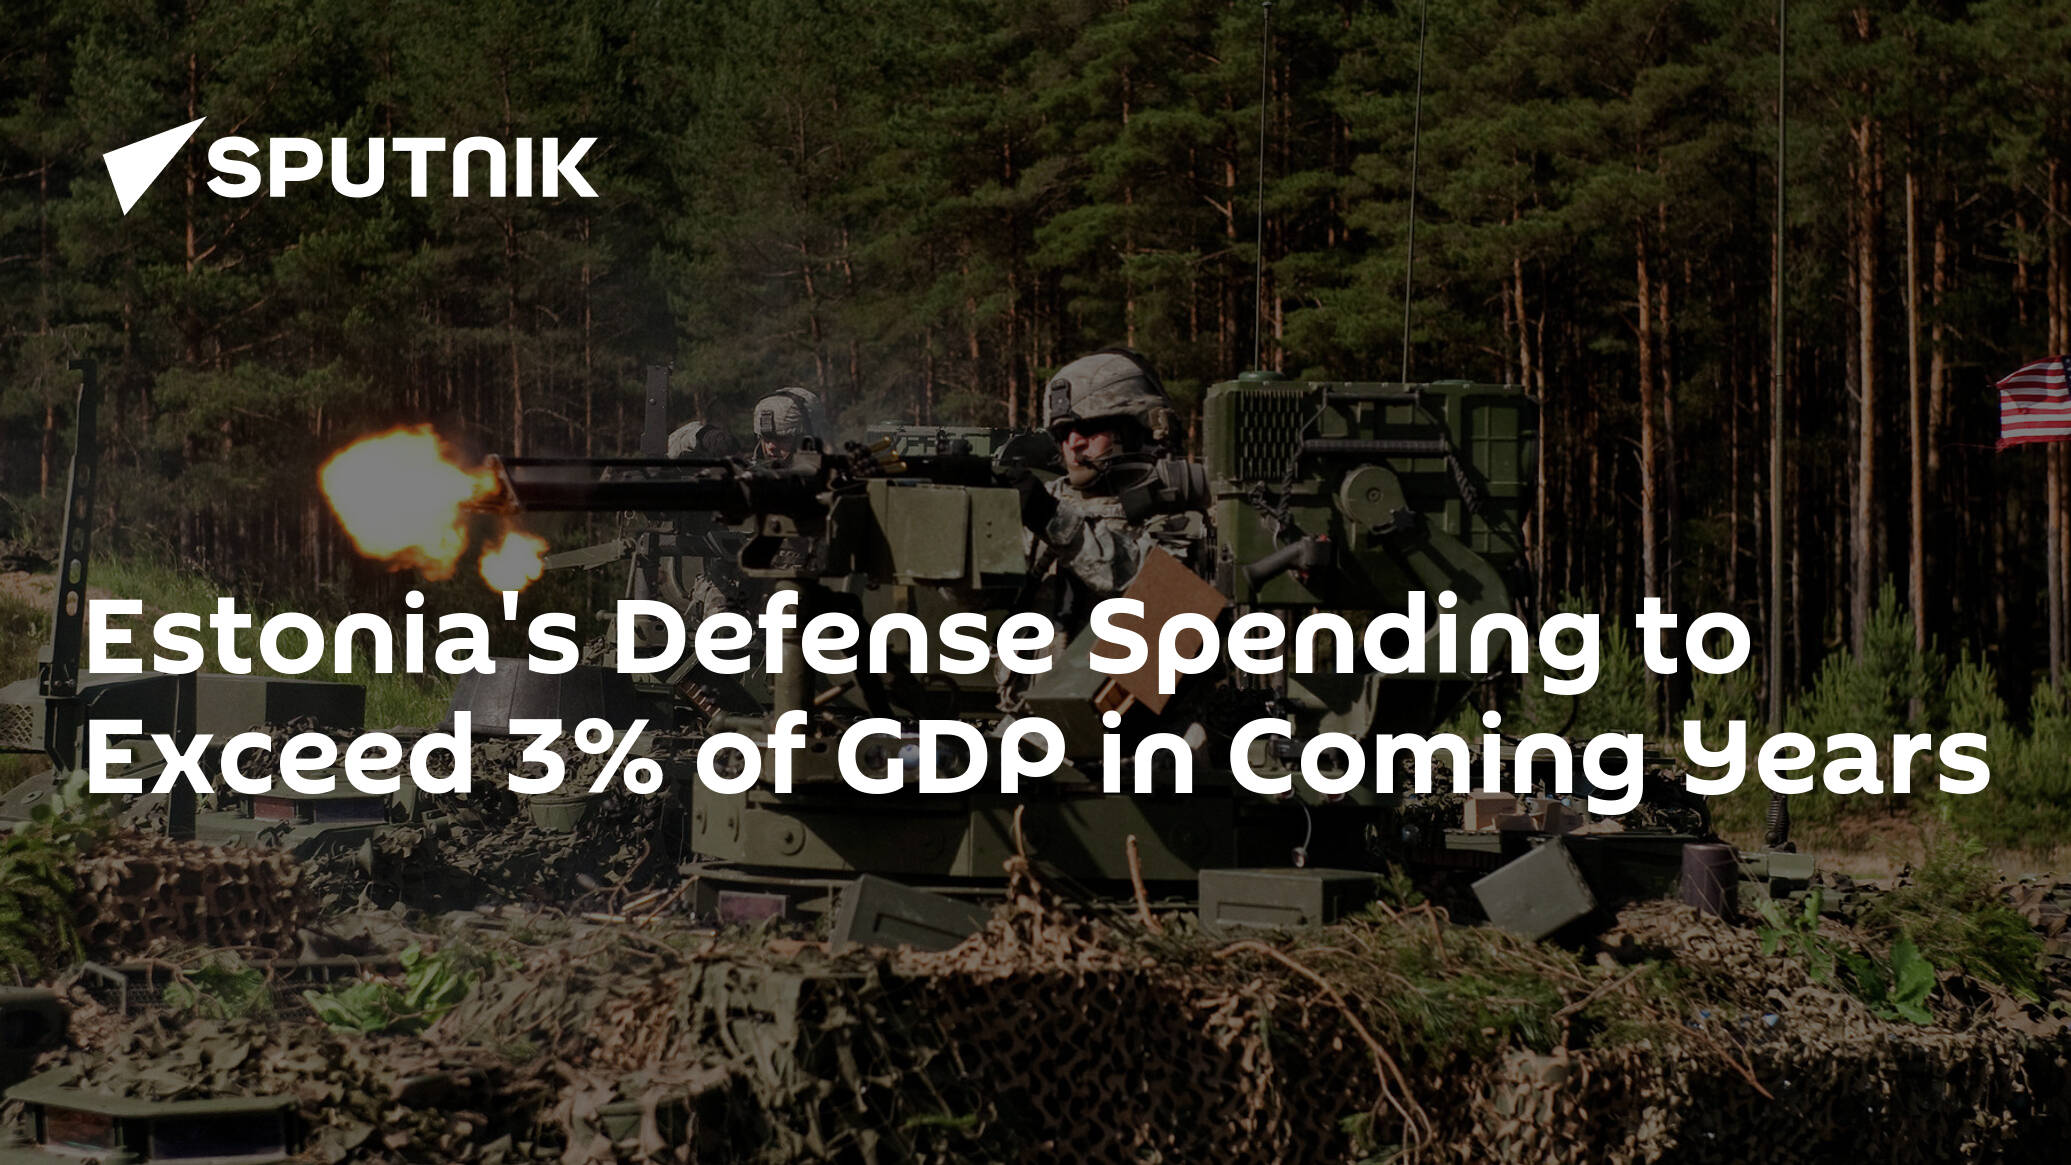 Estonia's Defense Spending to Exceed 3% of GDP in Coming Years